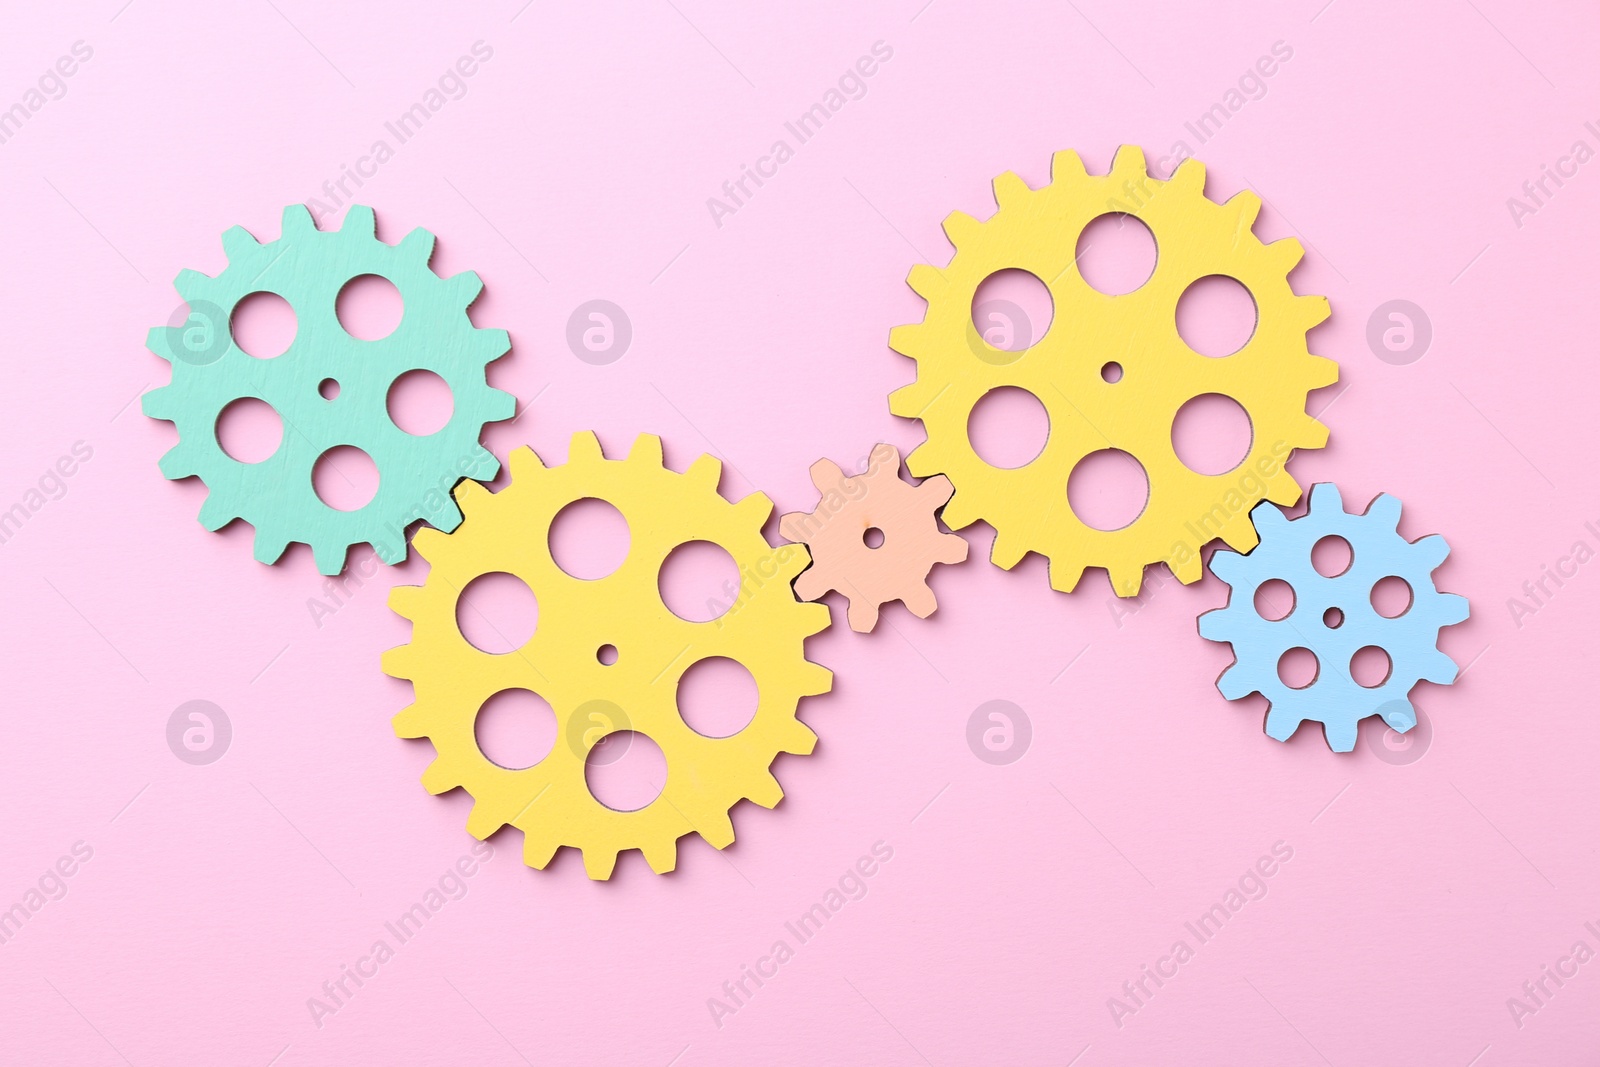 Photo of Business process organization and optimization. Scheme with colorful figures on pink background, top view